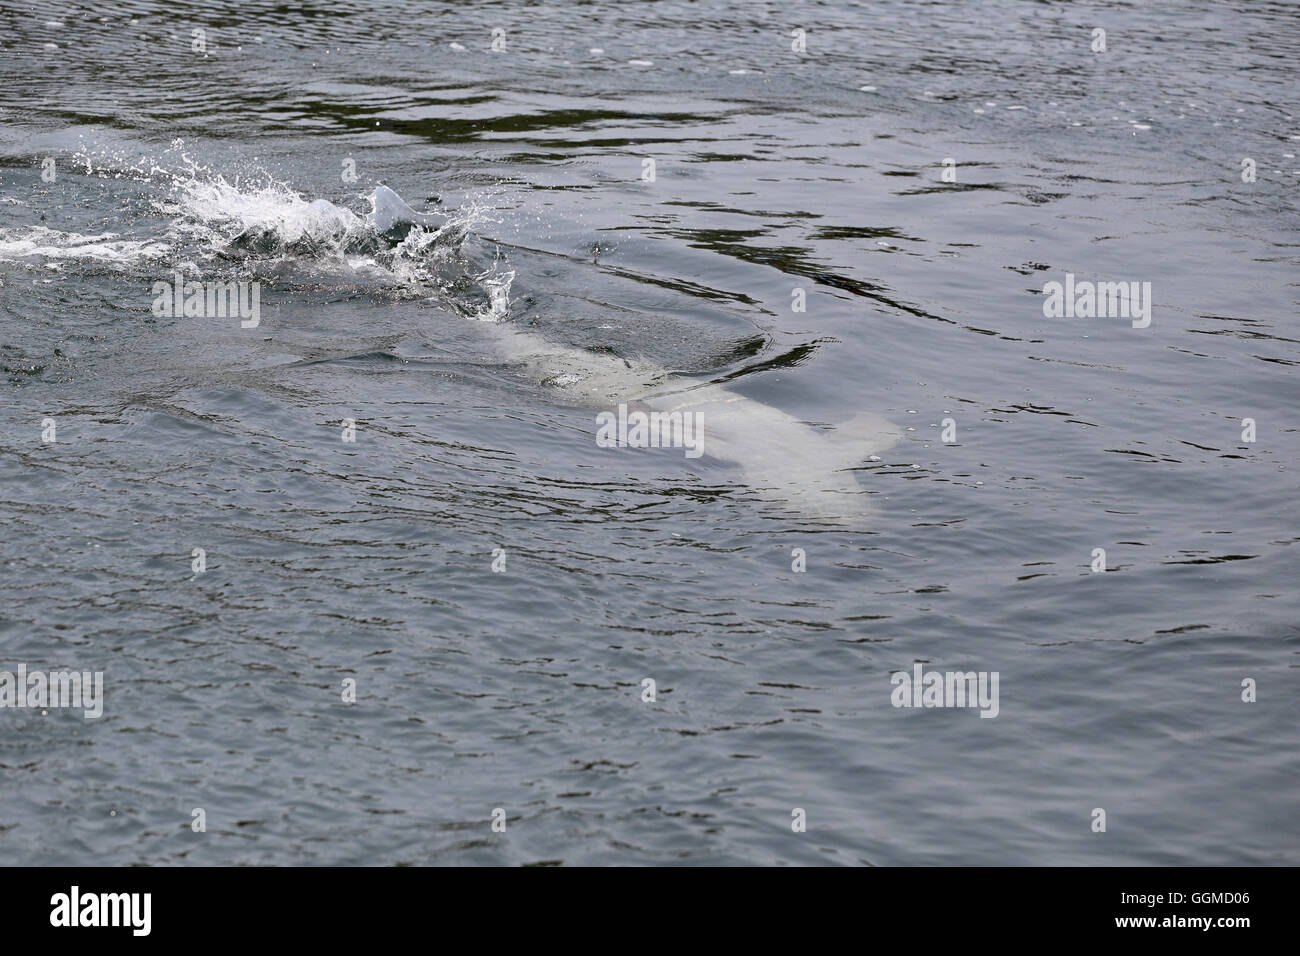 Dolphins is swimming water in the sea for the design animal background. Stock Photo